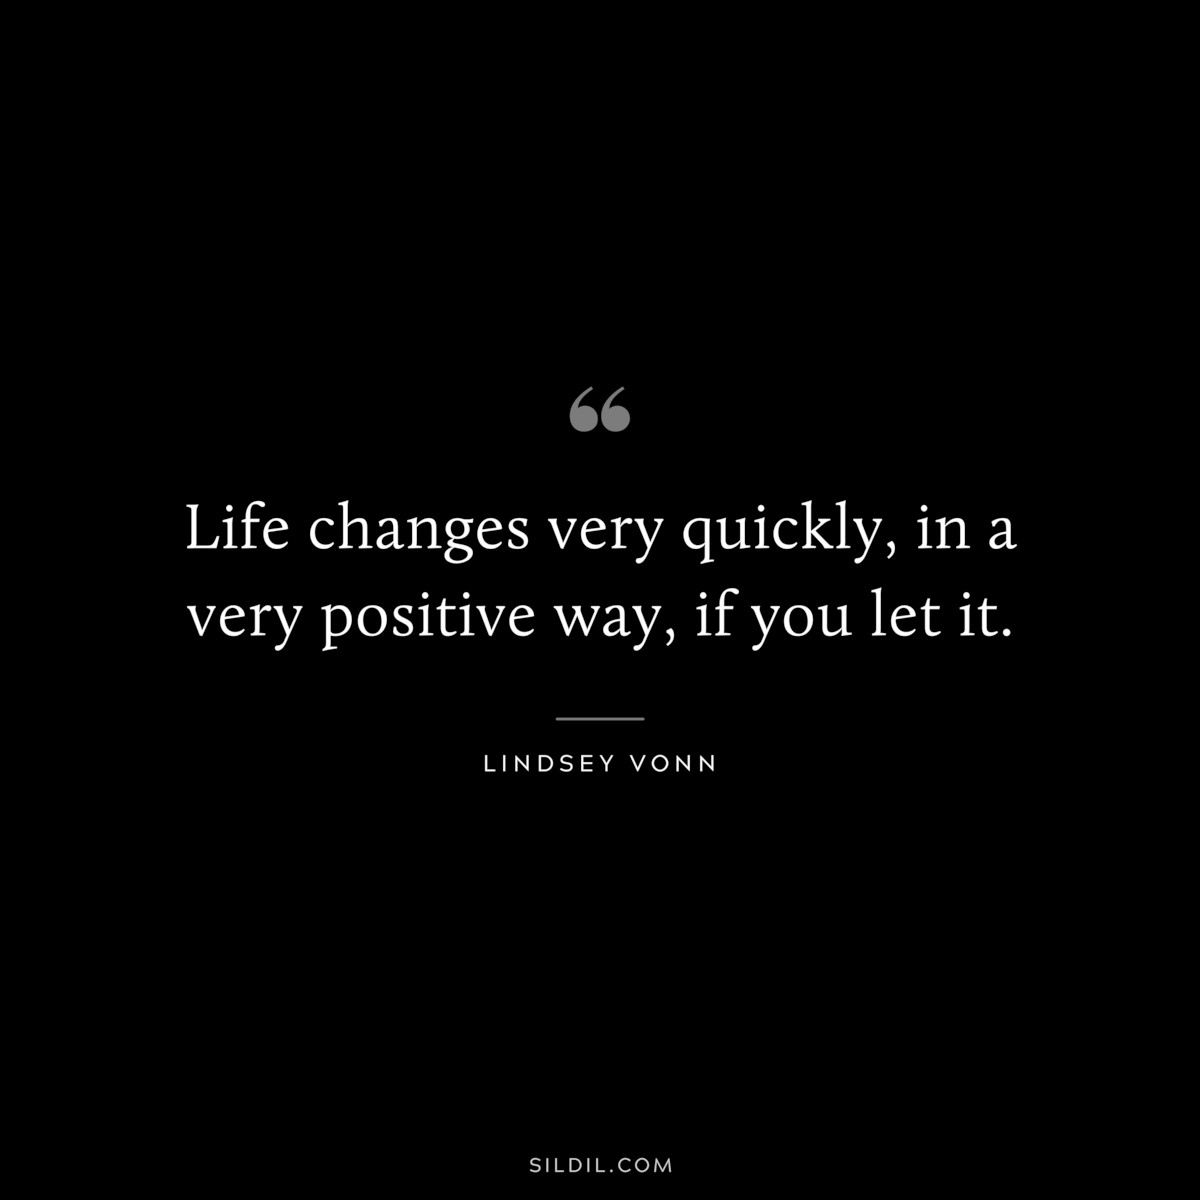 Life changes very quickly, in a very positive way, if you let it. ― Lindsey Vonn